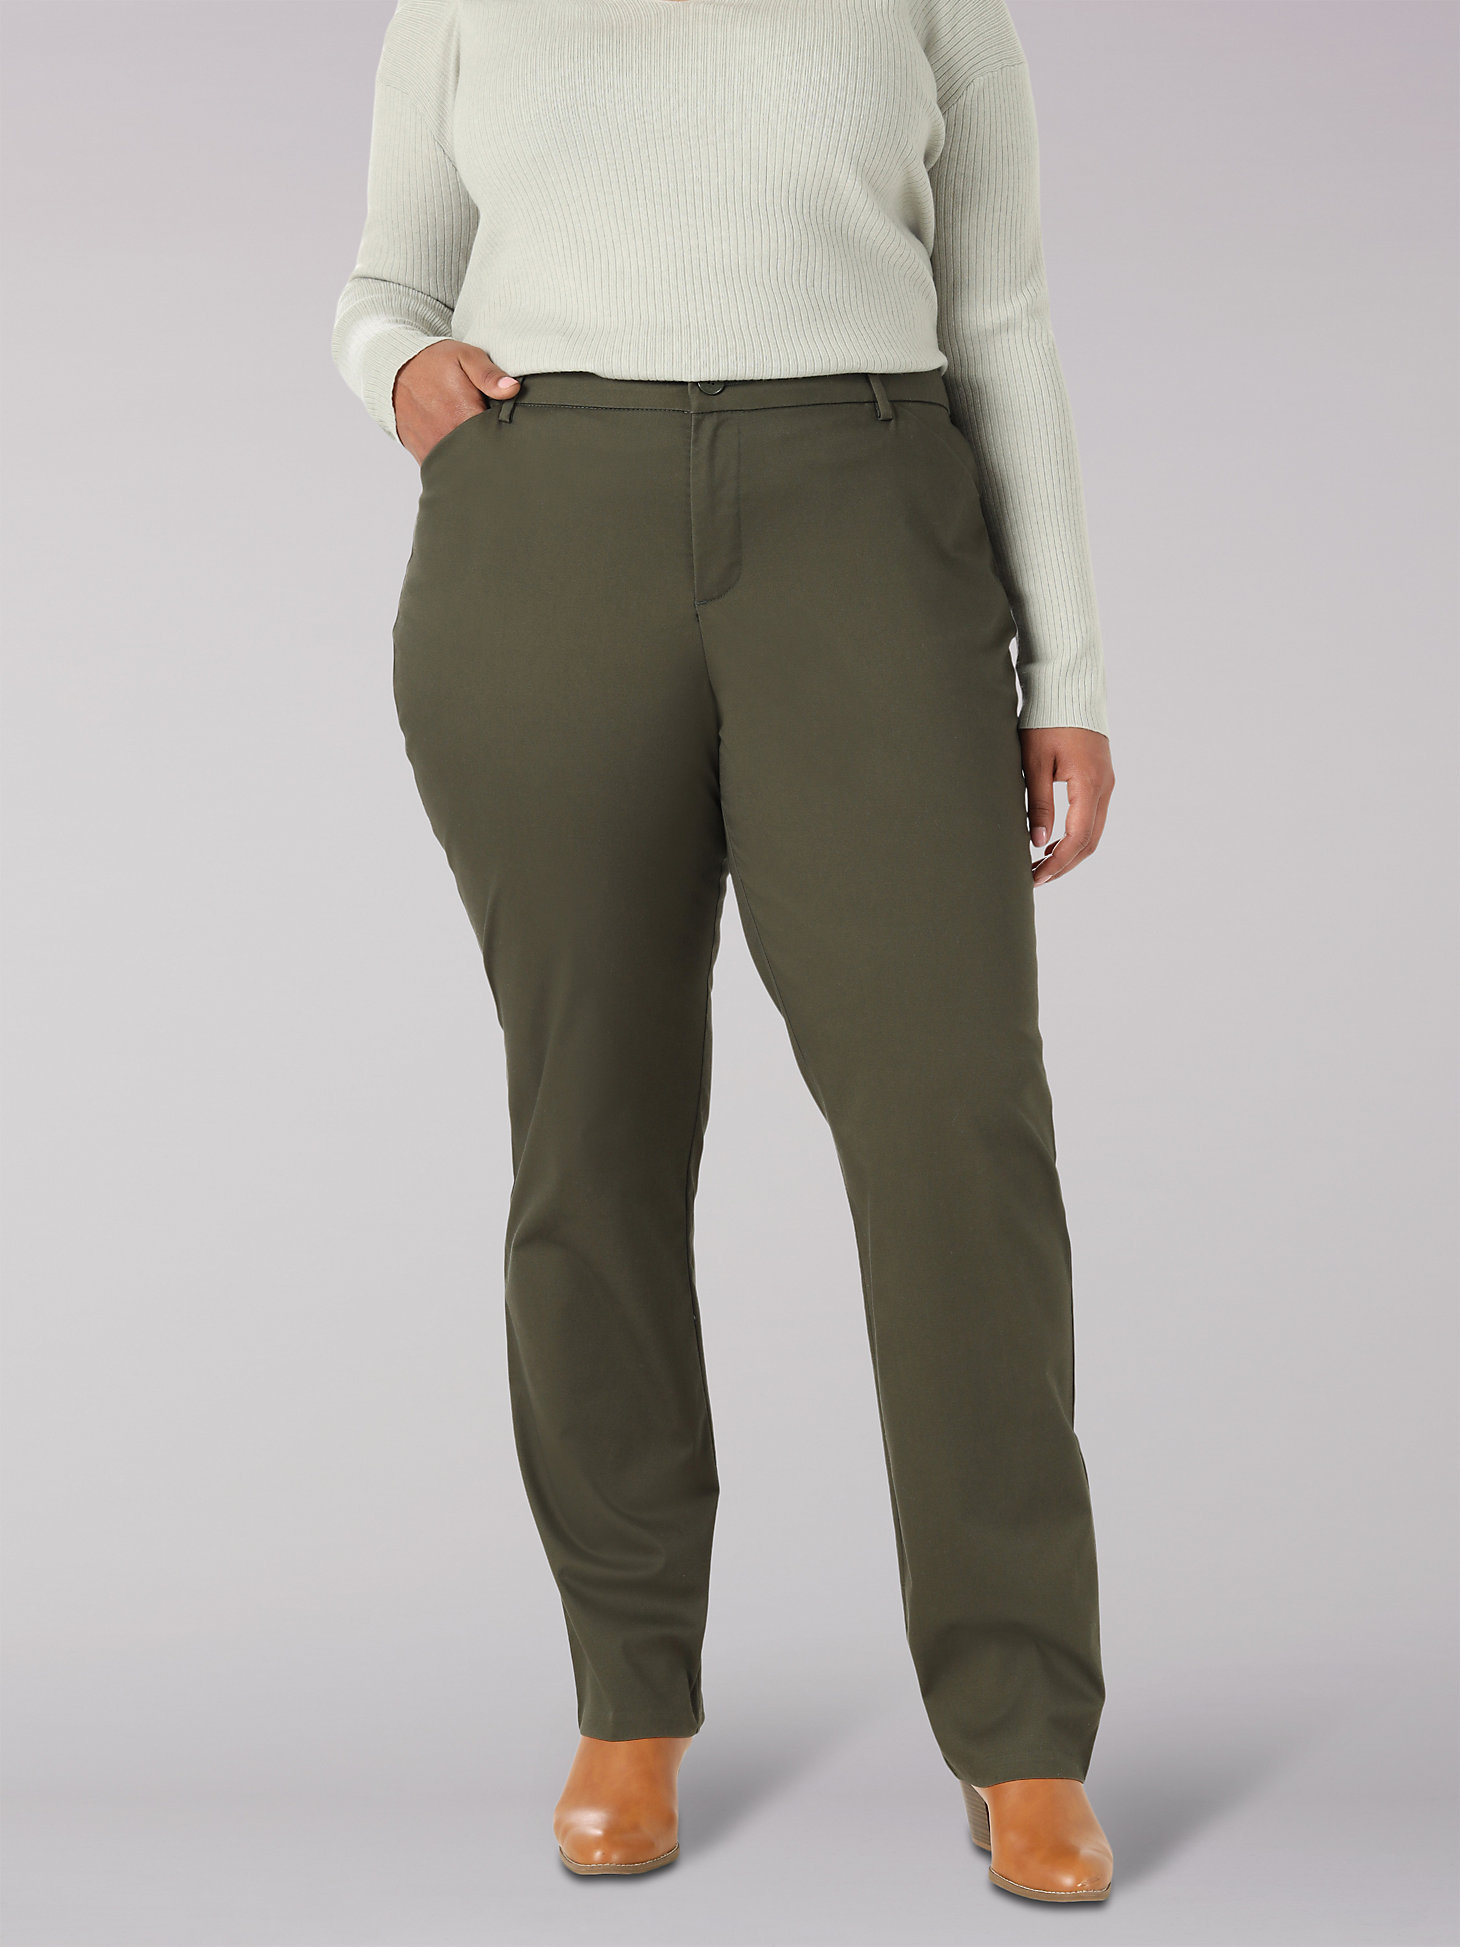 Women's Wrinkle Free Relaxed Fit Straight Leg Pant (Plus) in Frontier Olive main view